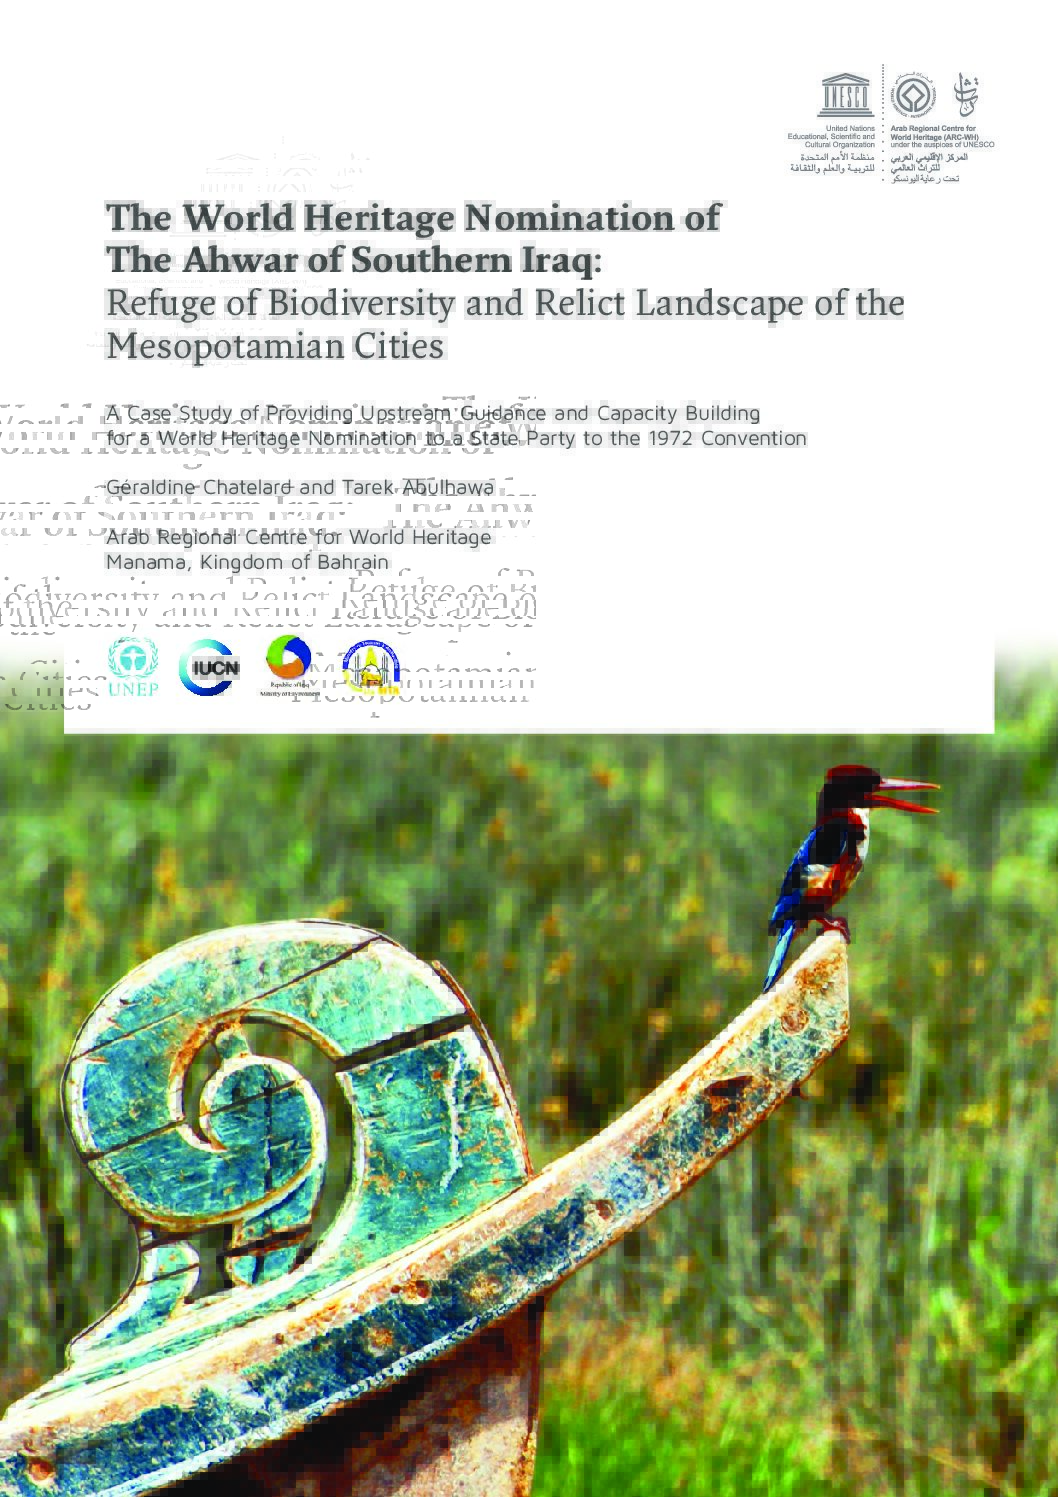 The World Heritage Nomination of The Ahwar of Southern Iraq